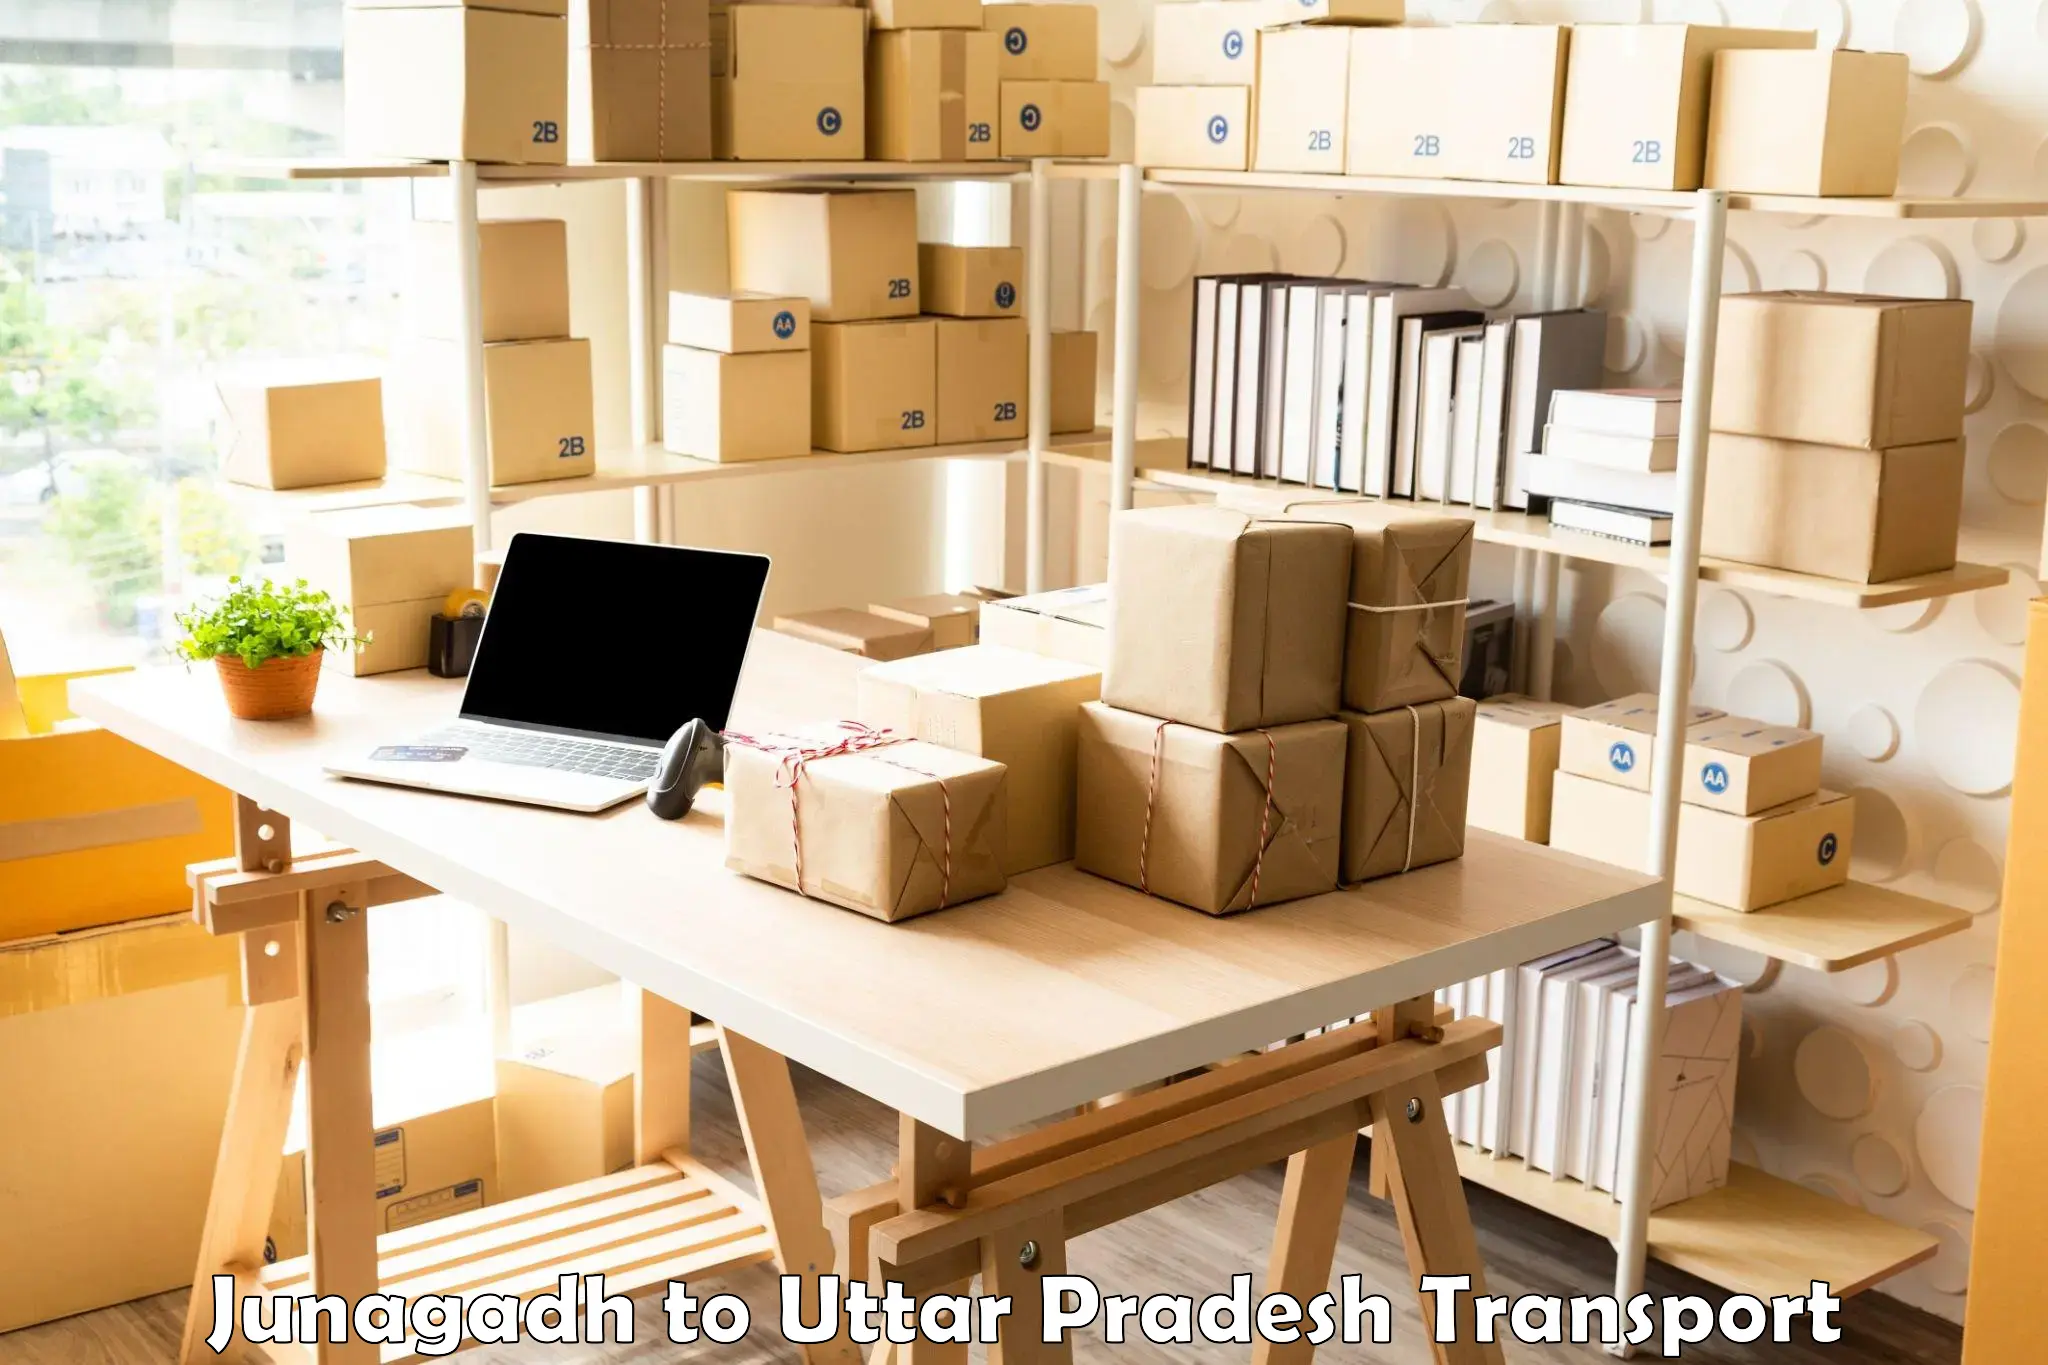 Container transportation services Junagadh to Aligarh